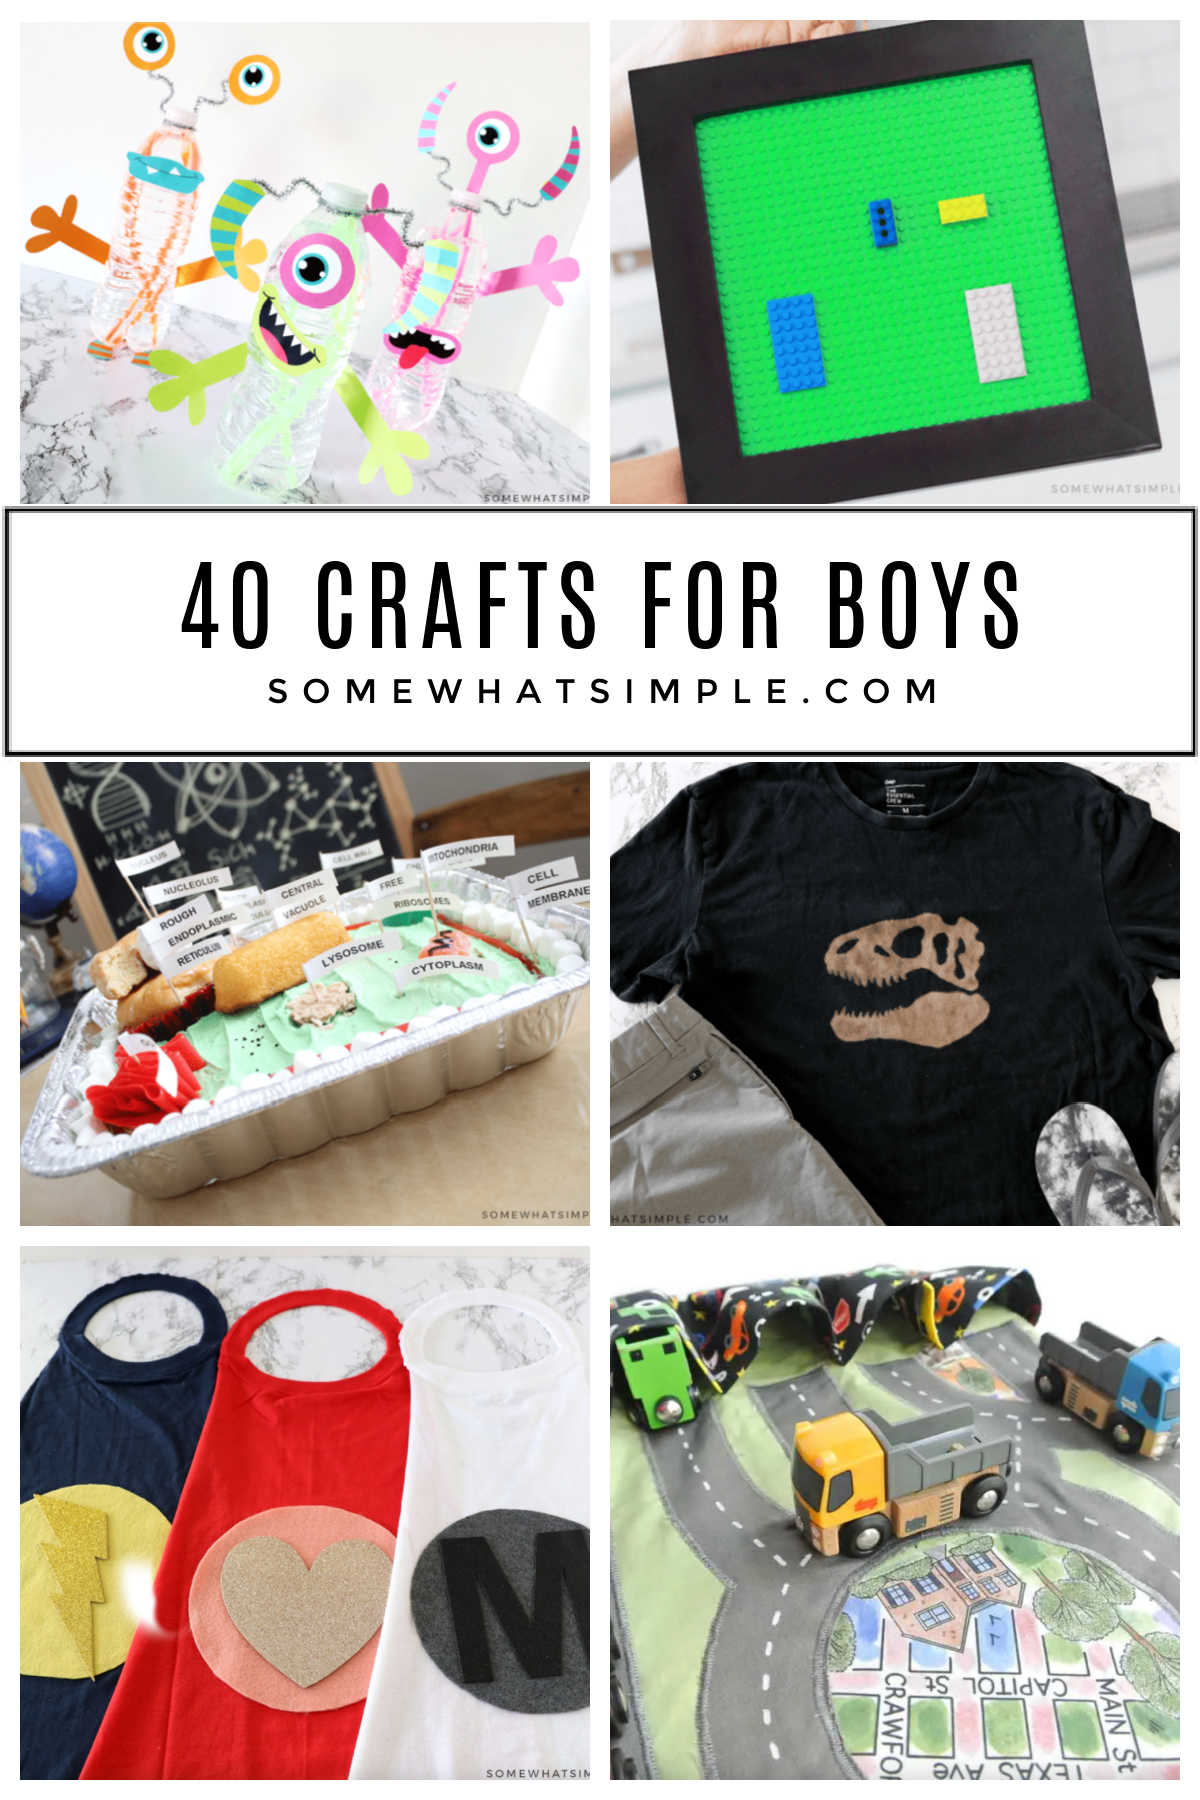 https://www.somewhatsimple.com/wp-content/uploads/2022/07/40-crafts-for-boys.jpeg